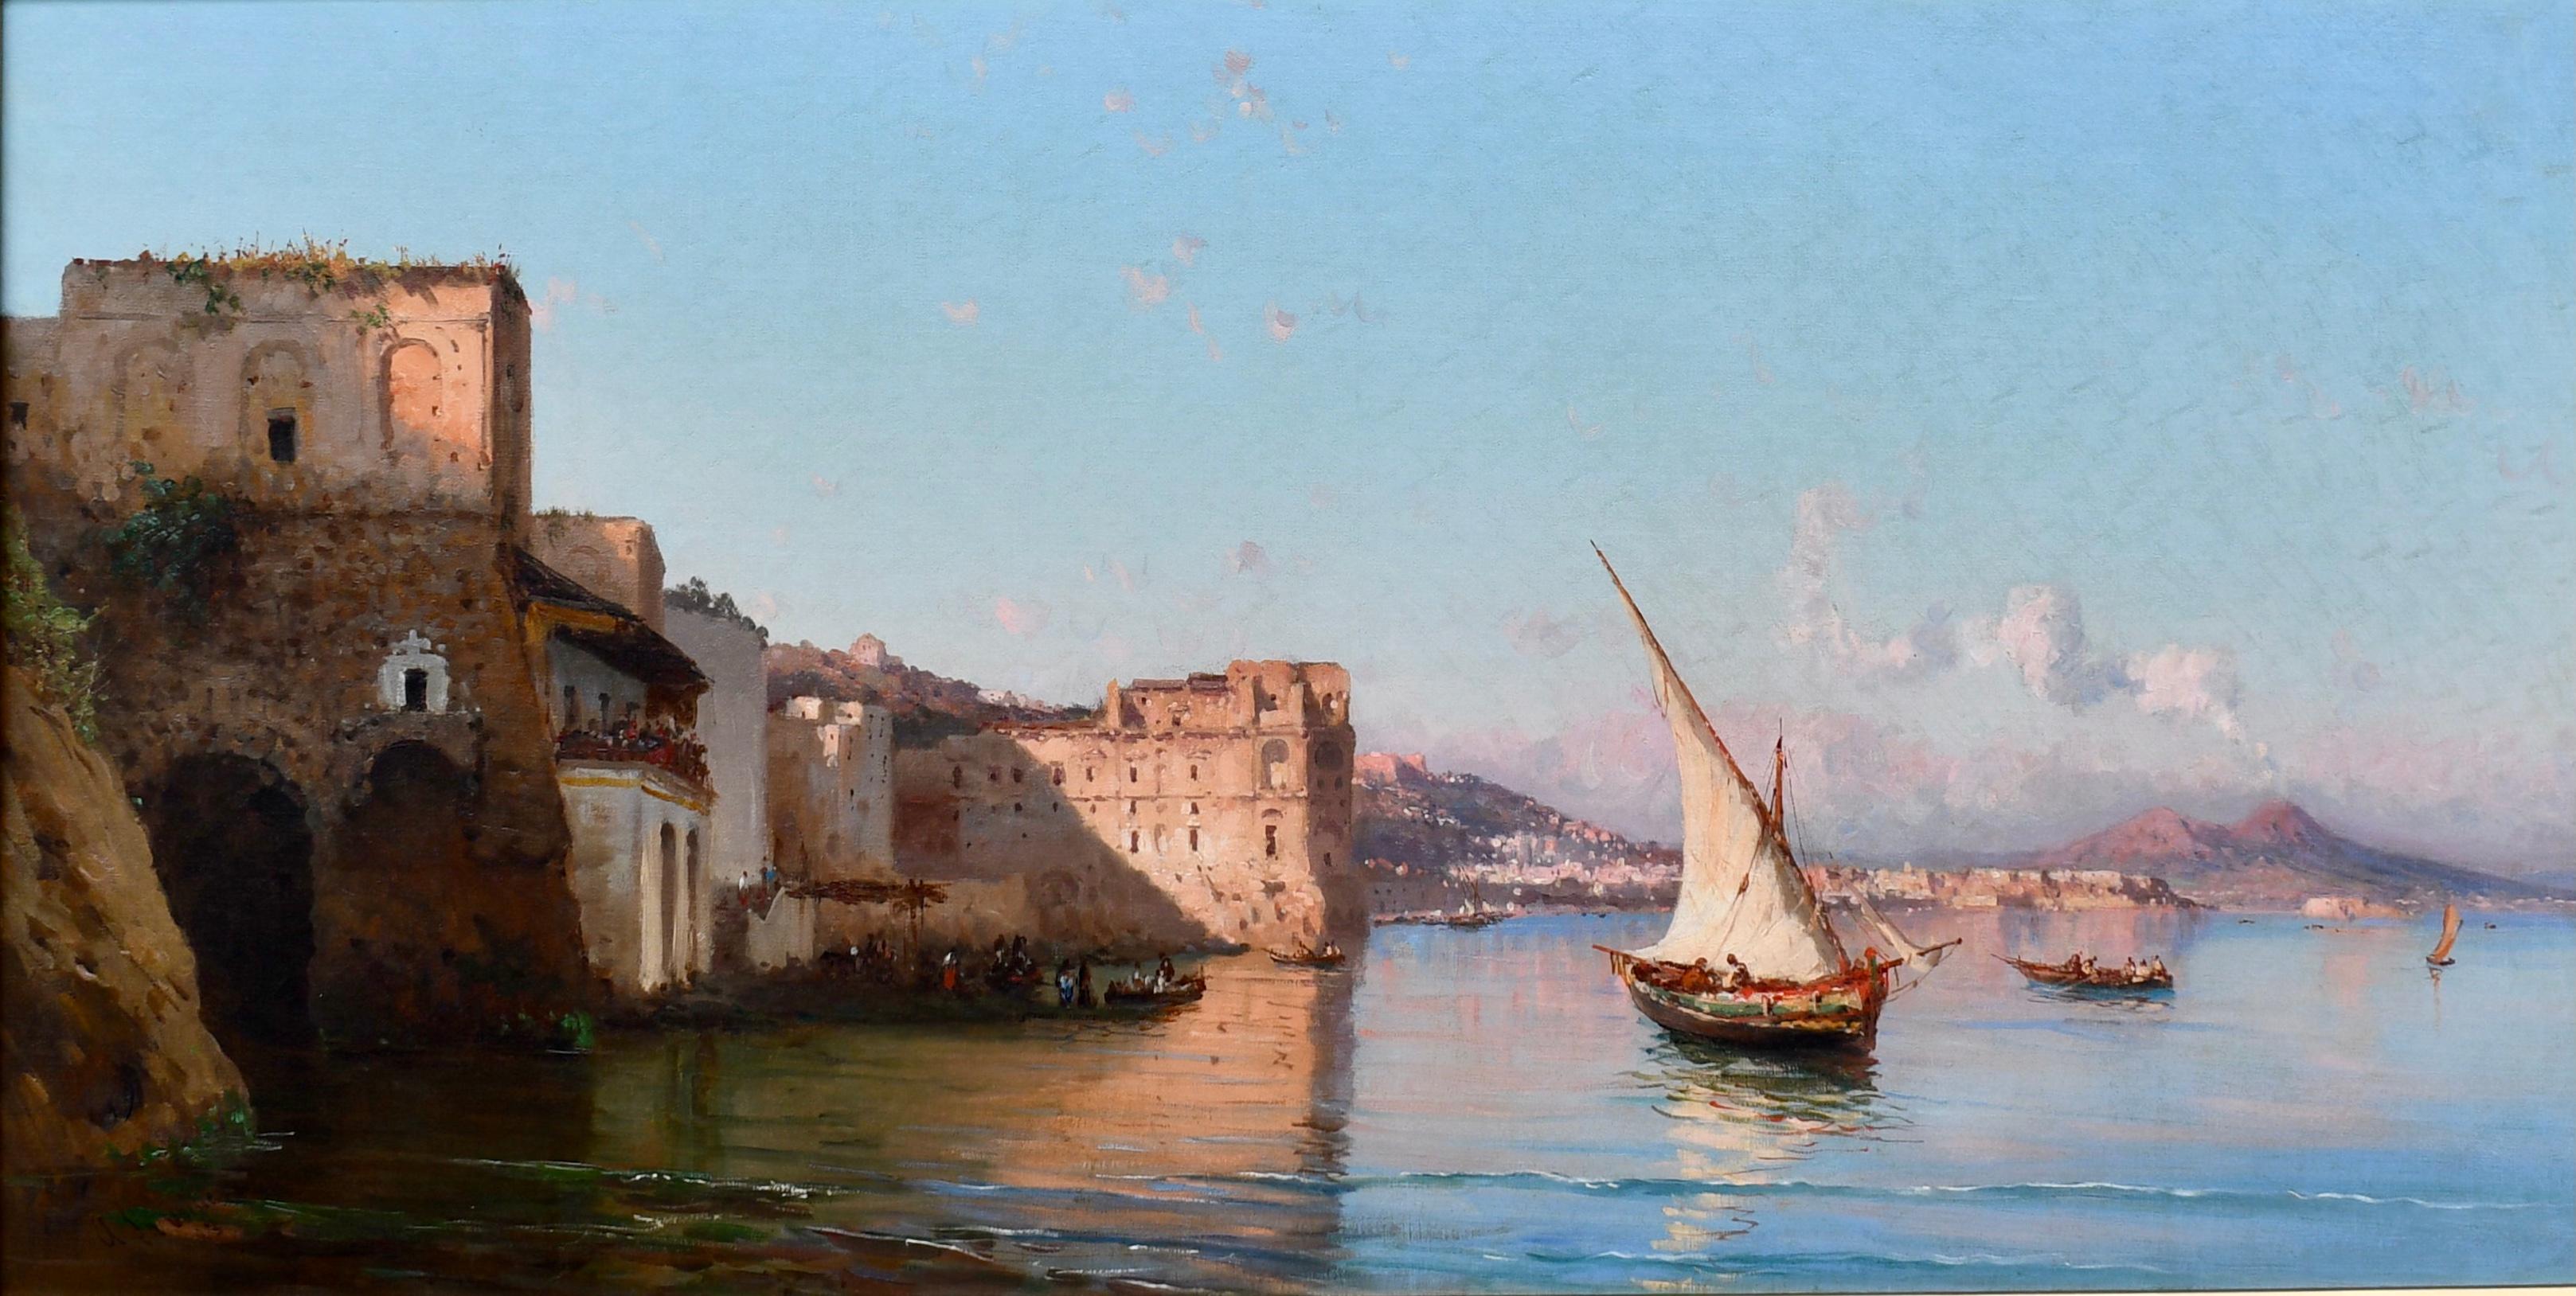 Mount Vesuvius from the Bay of Naples - Painting by Alessandro La Volpe